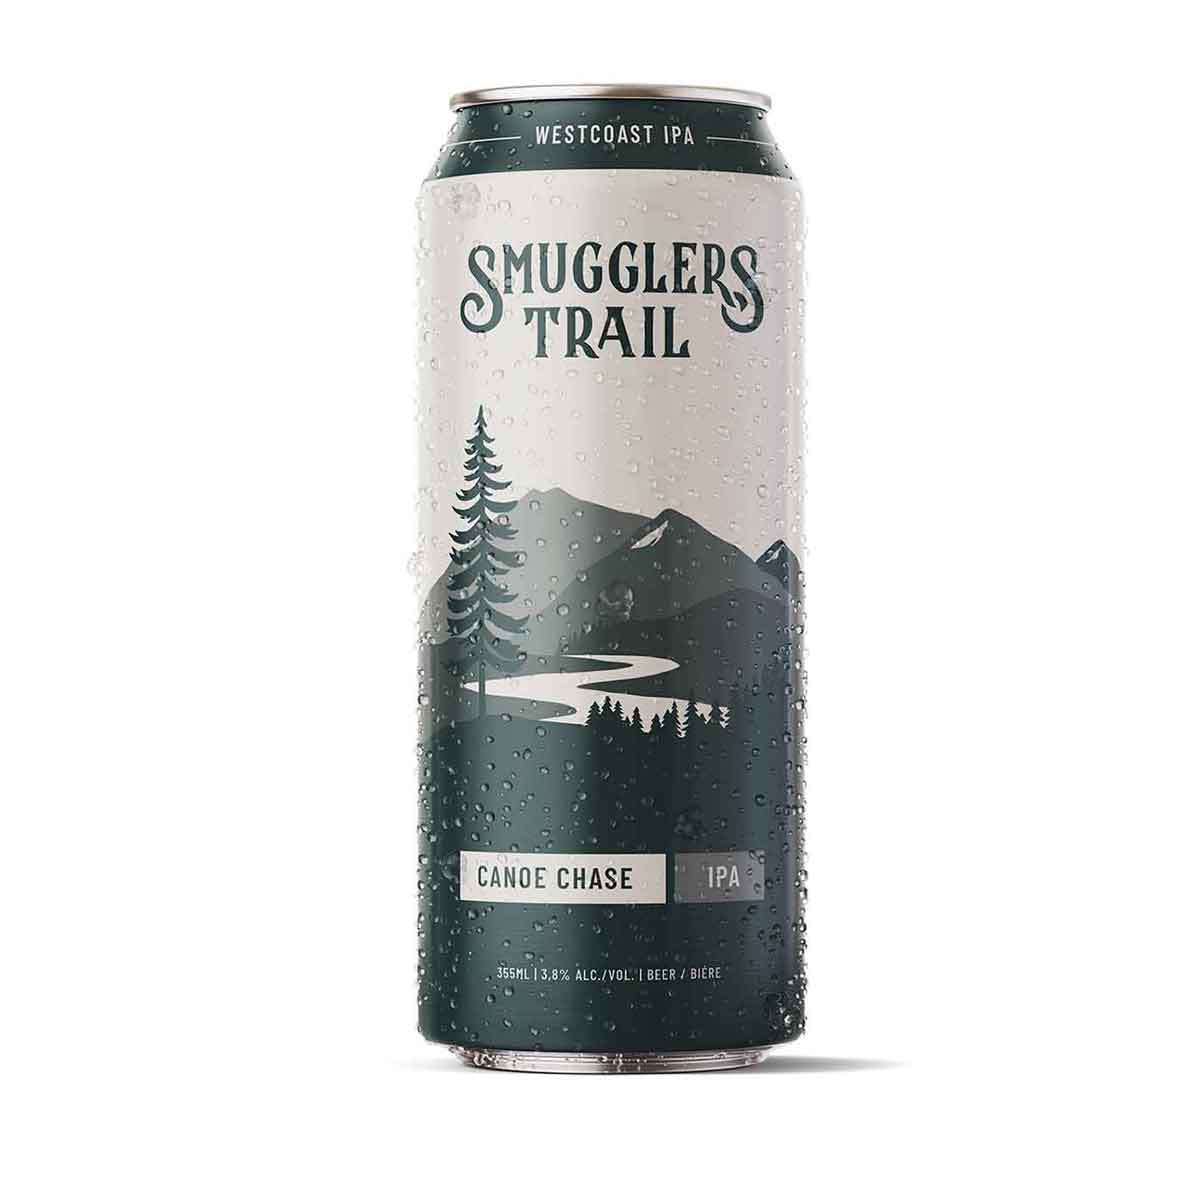 TAG Liquor Stores BC-SMUGGLERS TRAIL CANOE CHASE IPA 4 TALL CANS